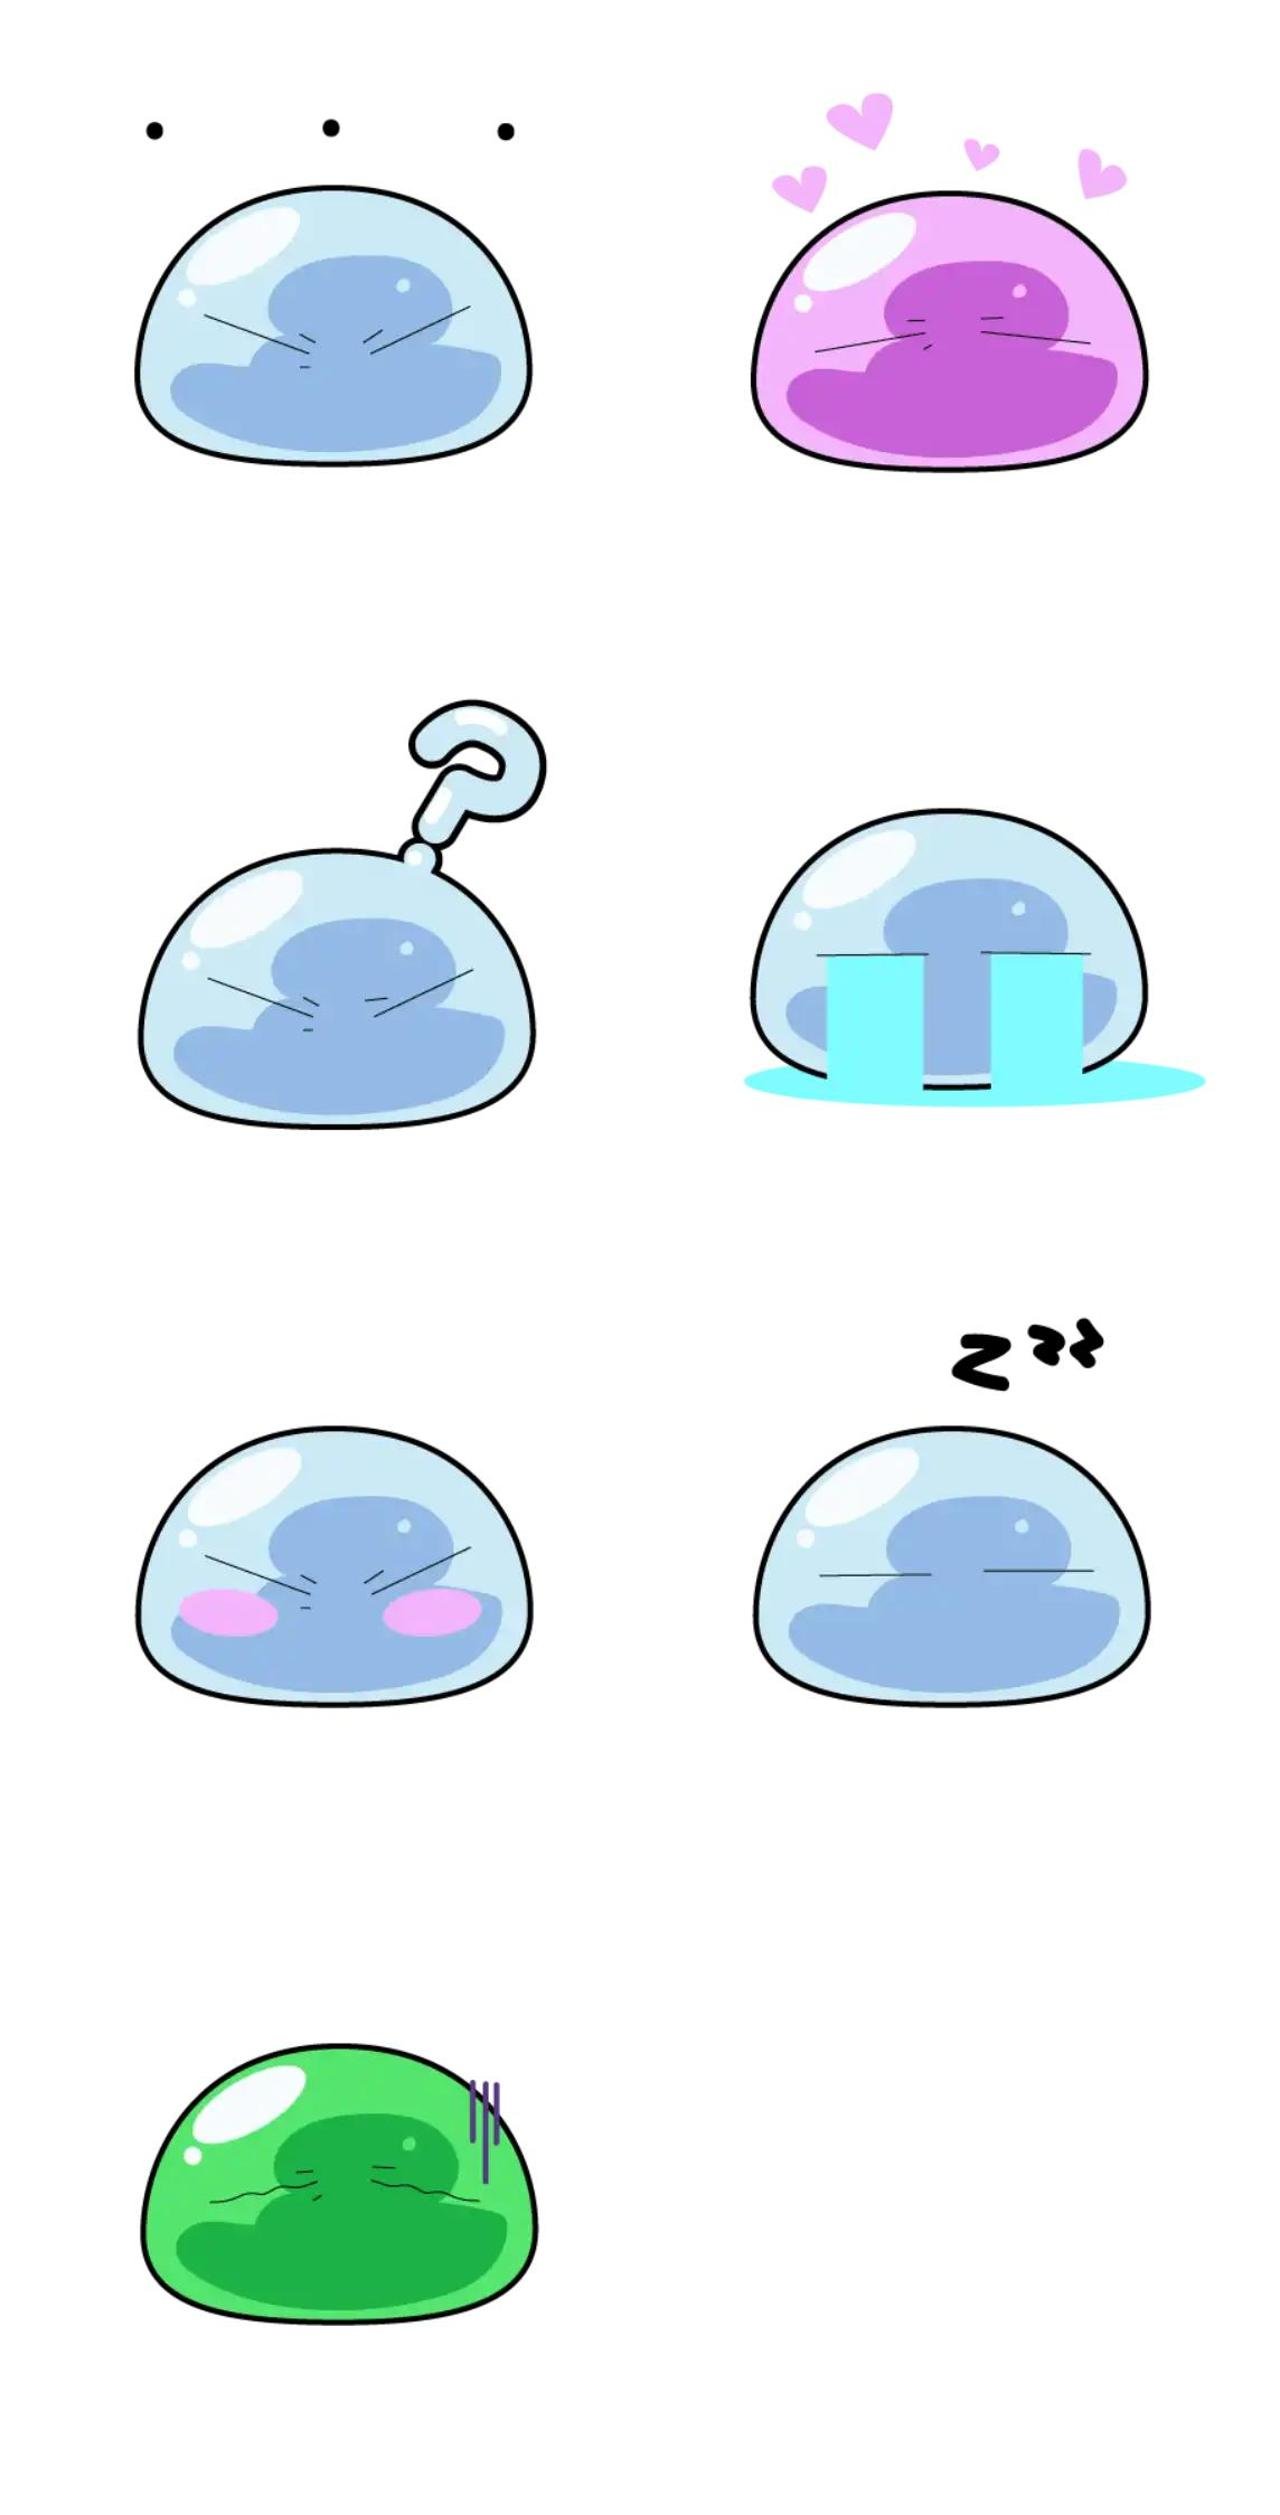 Slime Animation/Cartoon,Etc. sticker pack for Whatsapp, Telegram, Signal, and others chatting and message apps